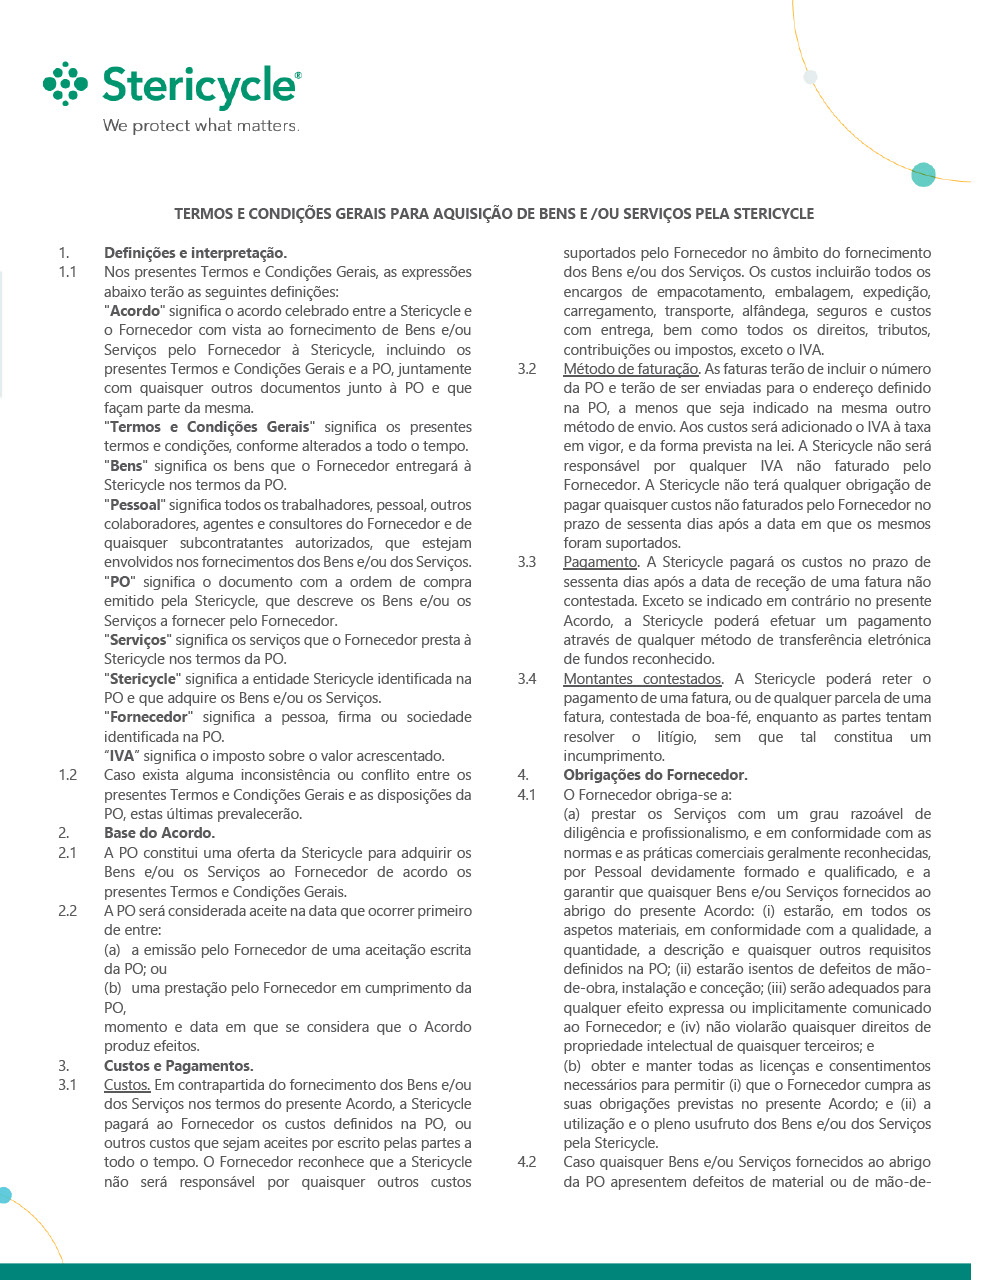 stericycle-portugal-po-terms-and-conditions.pdf